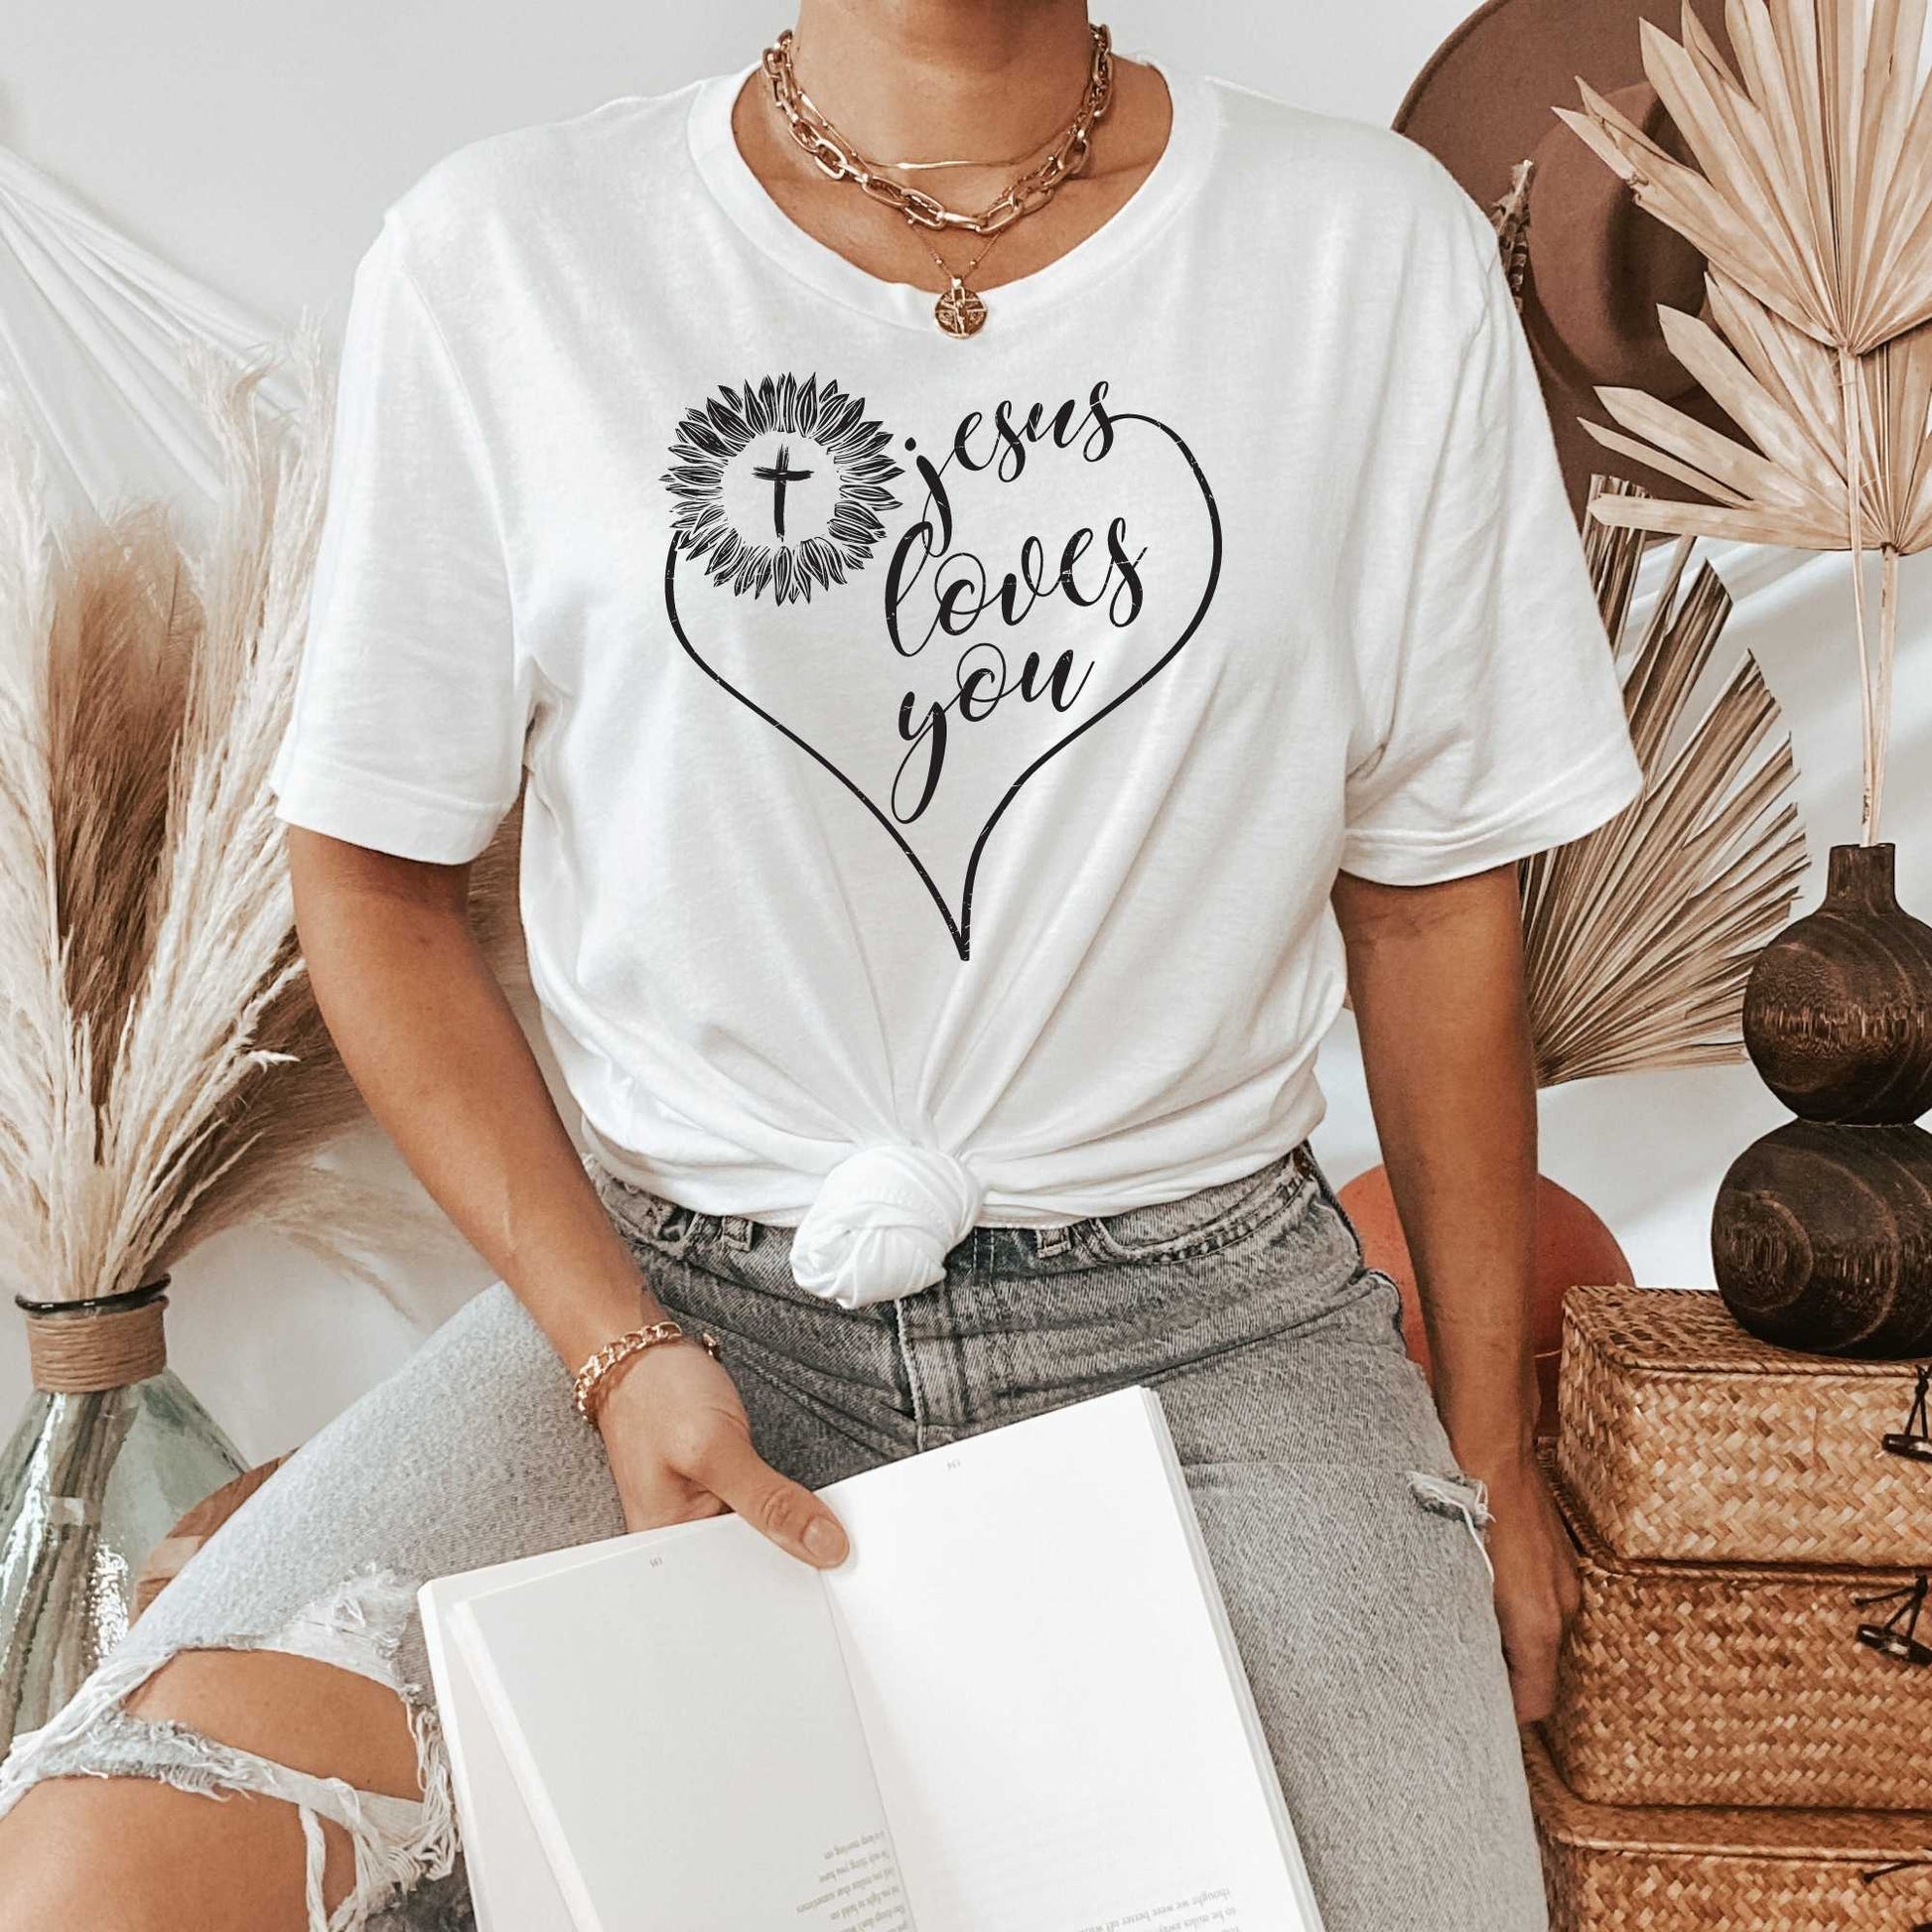 Jesus Loves You Shirt about God for Women